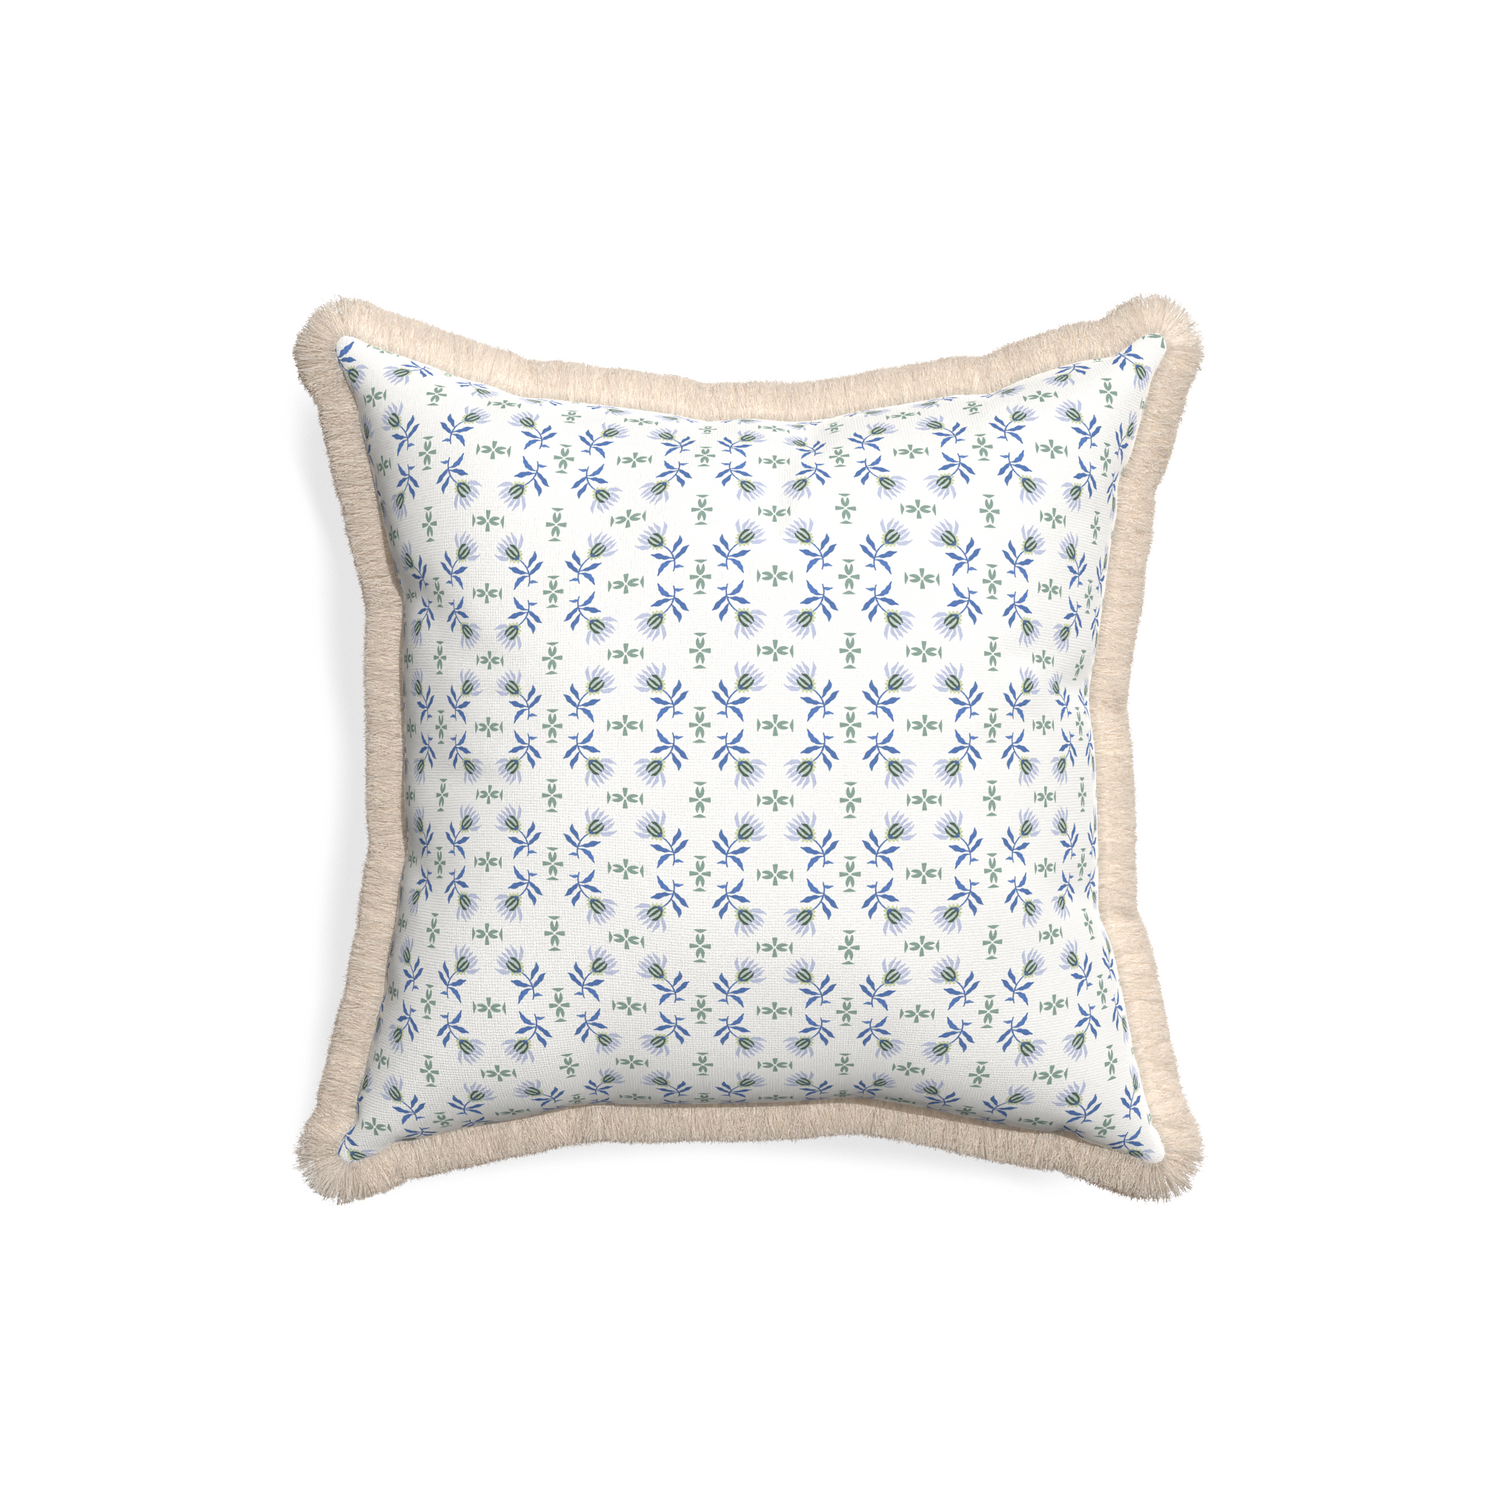 18-square lee custom pillow with cream fringe on white background